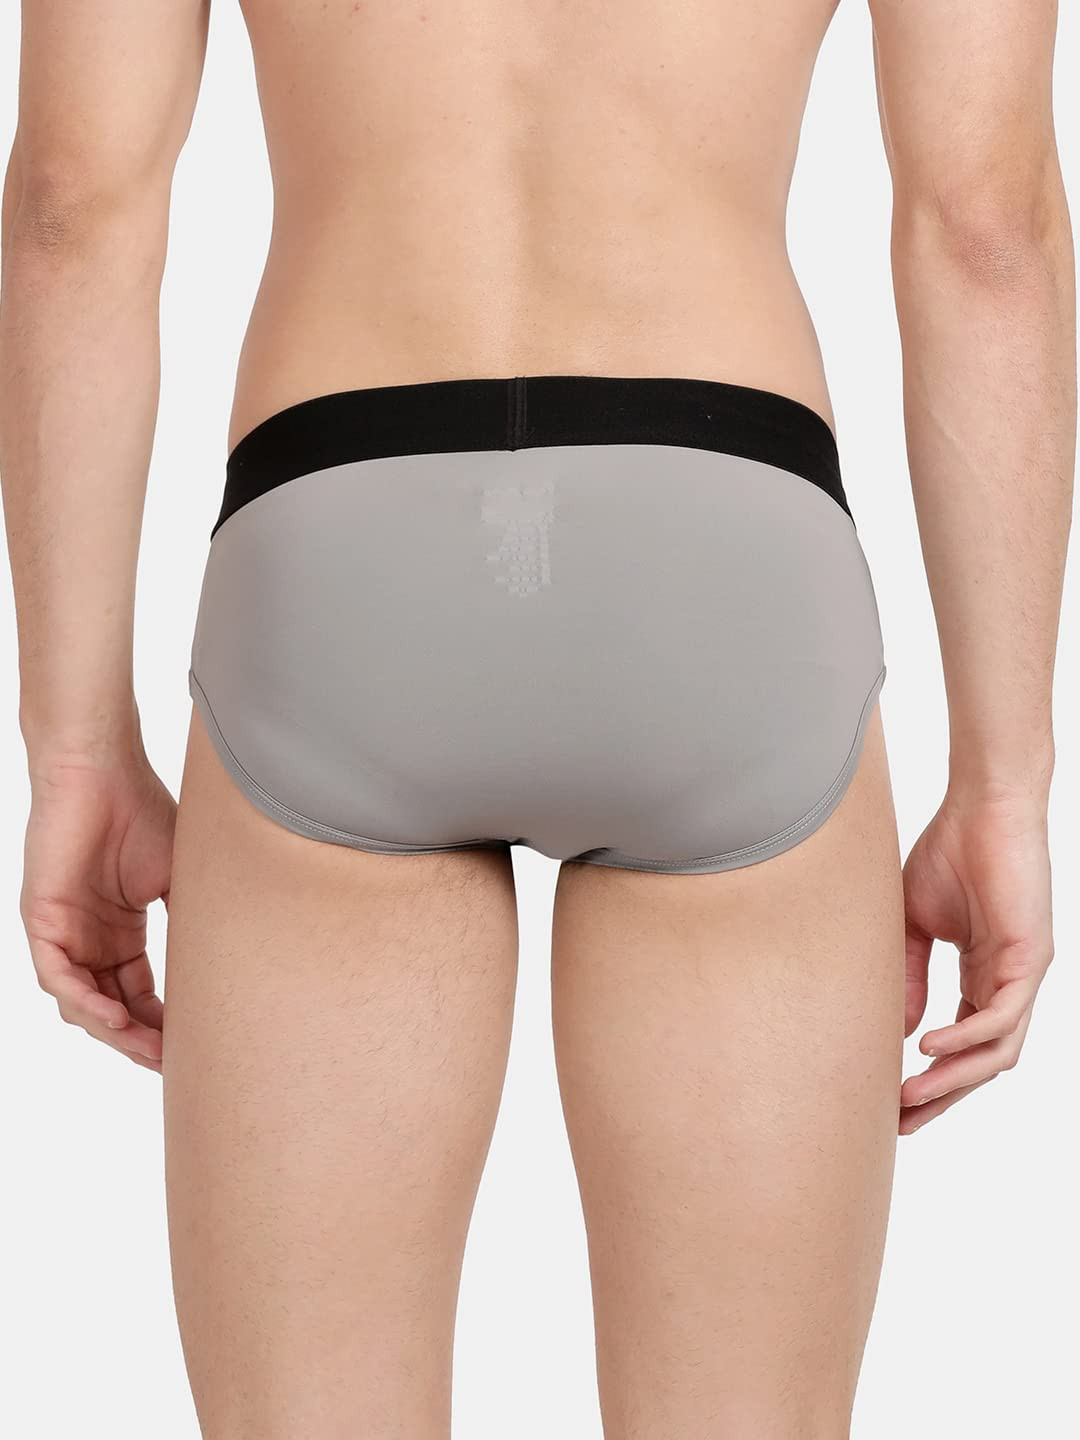 Pepe Jeans Men's Nylon Classic Solid Briefs (Pack of 1)  (BGB01_Grey_XL),Size XL